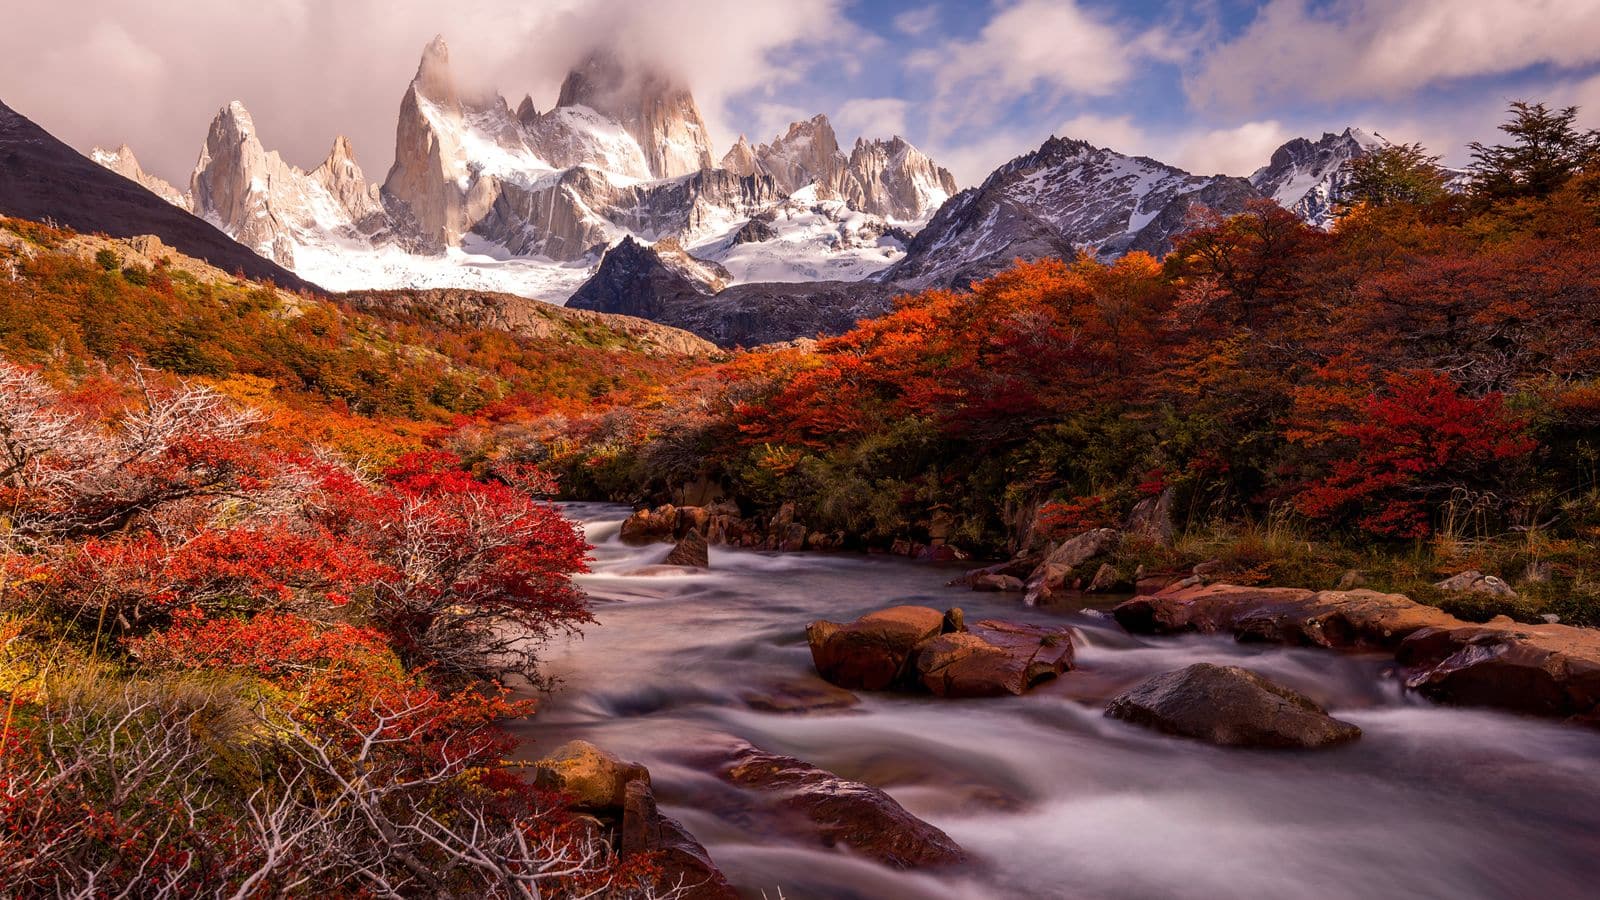 Trek through Patagonia's majestic glaciers with this guide